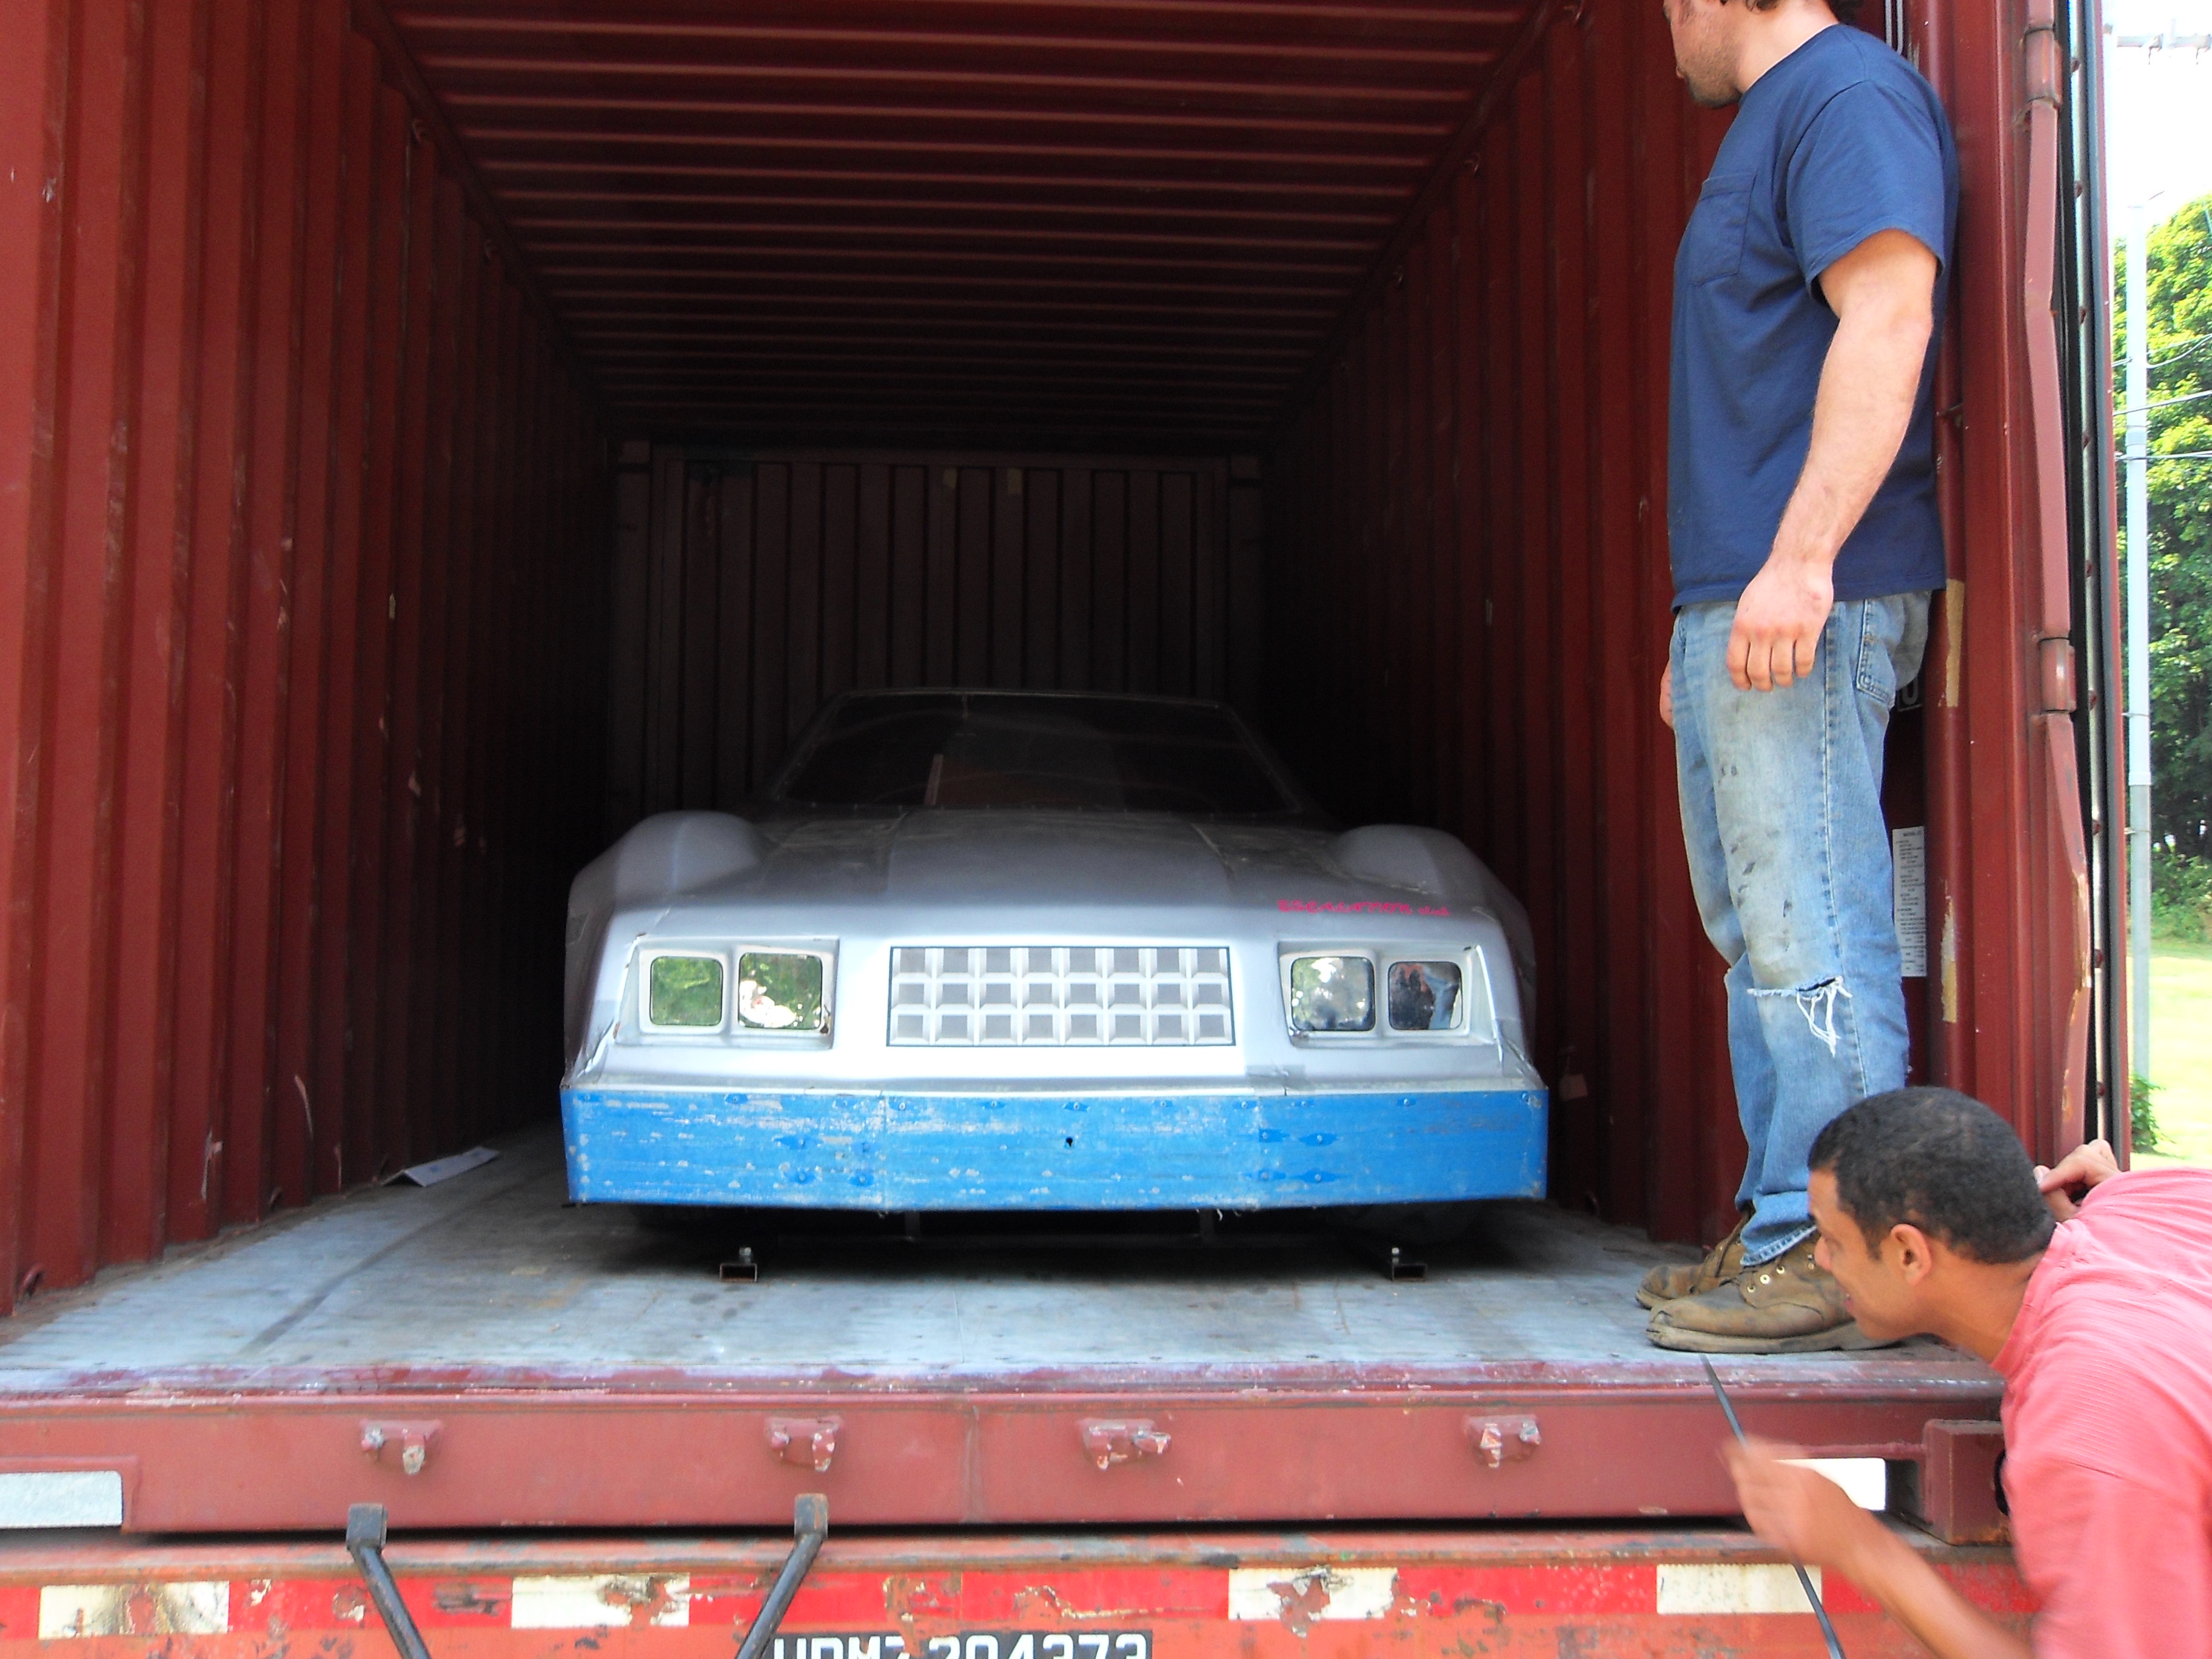 Vanishing Point arriving in container from overseas